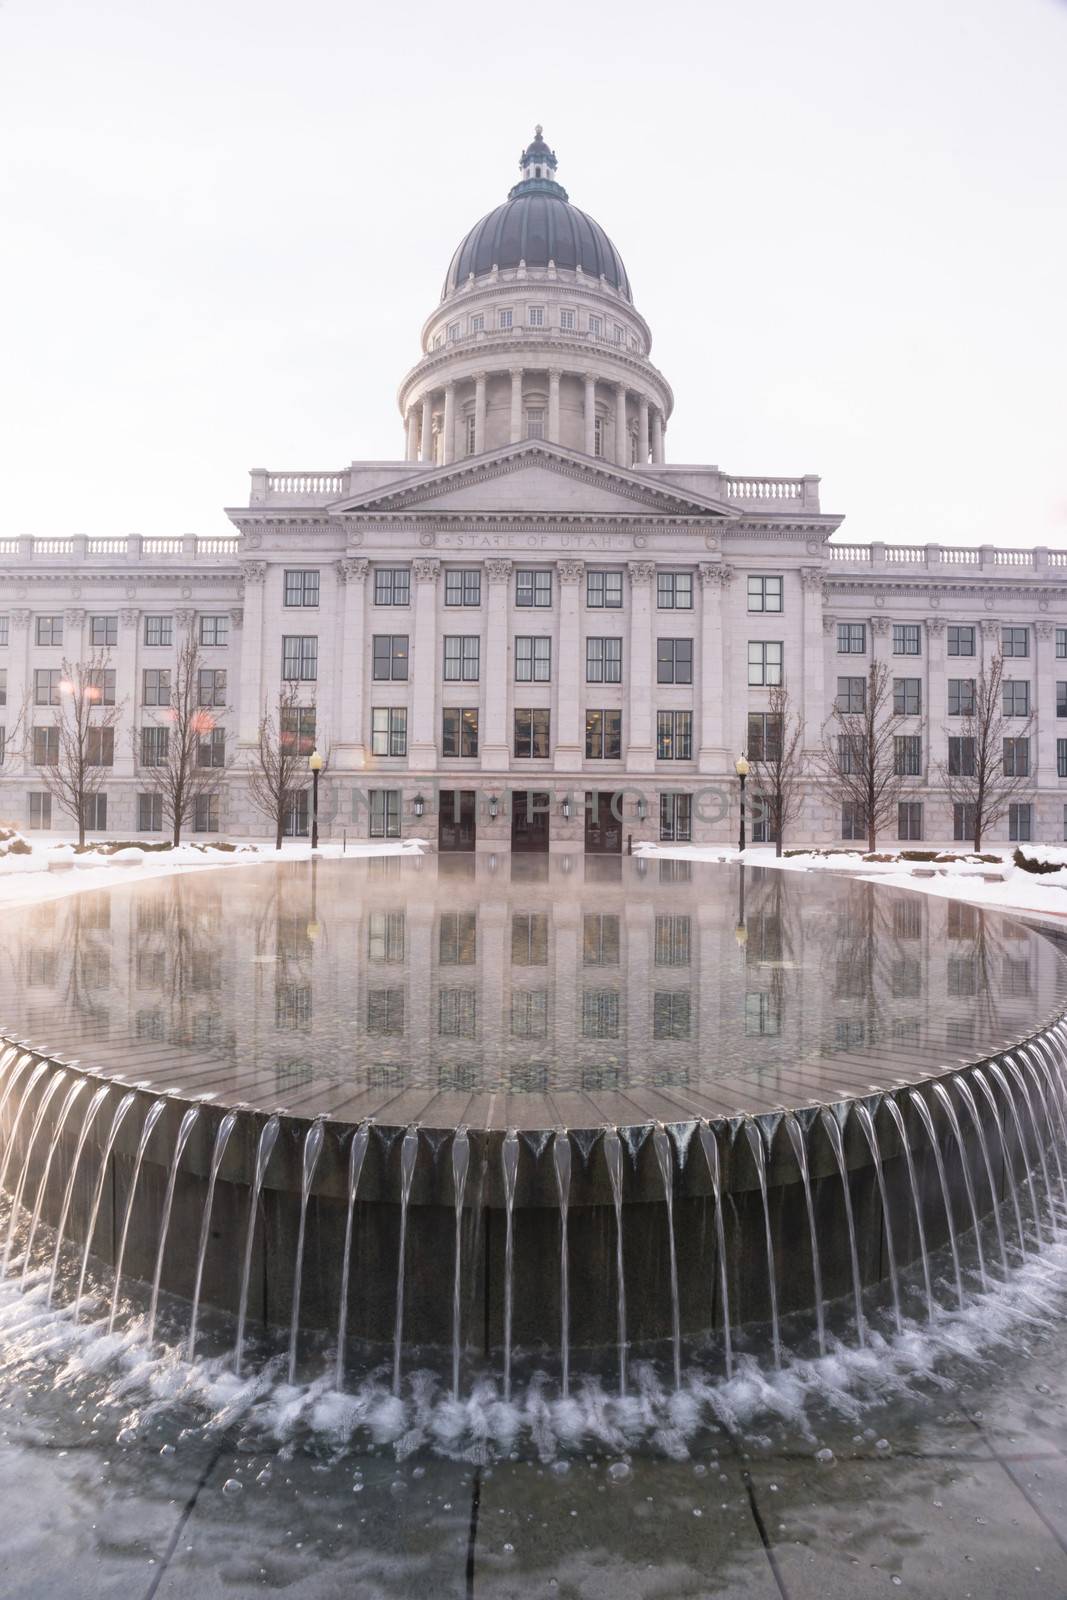 A fountain runs 24/7 on the grounds of Utah's State Capital